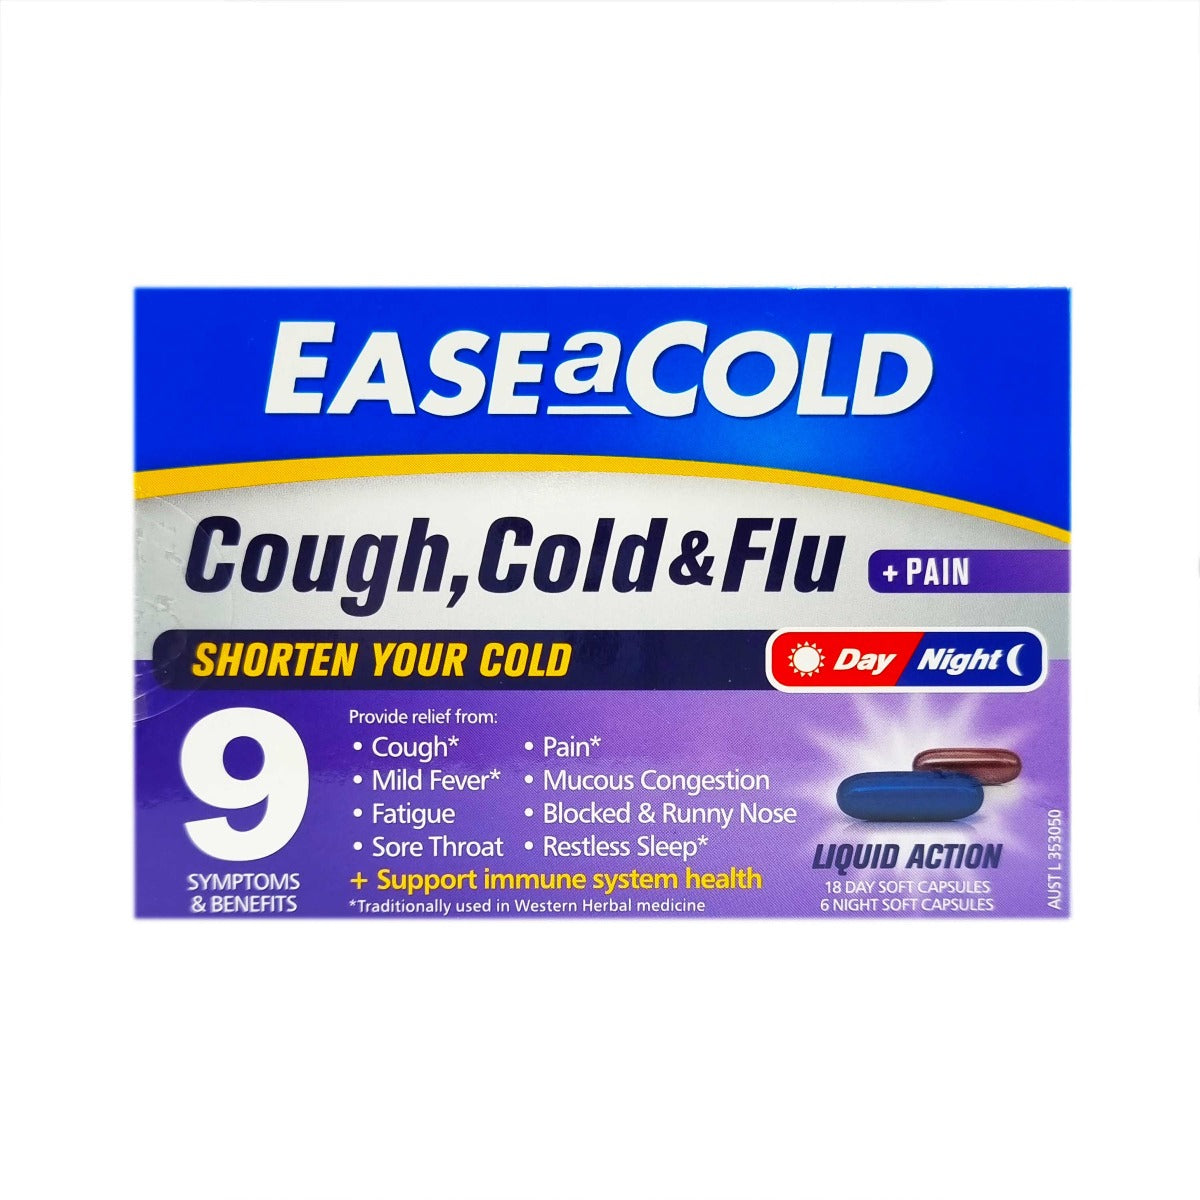 Ease-A-Cold Cough, Cold & Flu Day & Night Capsules 24's